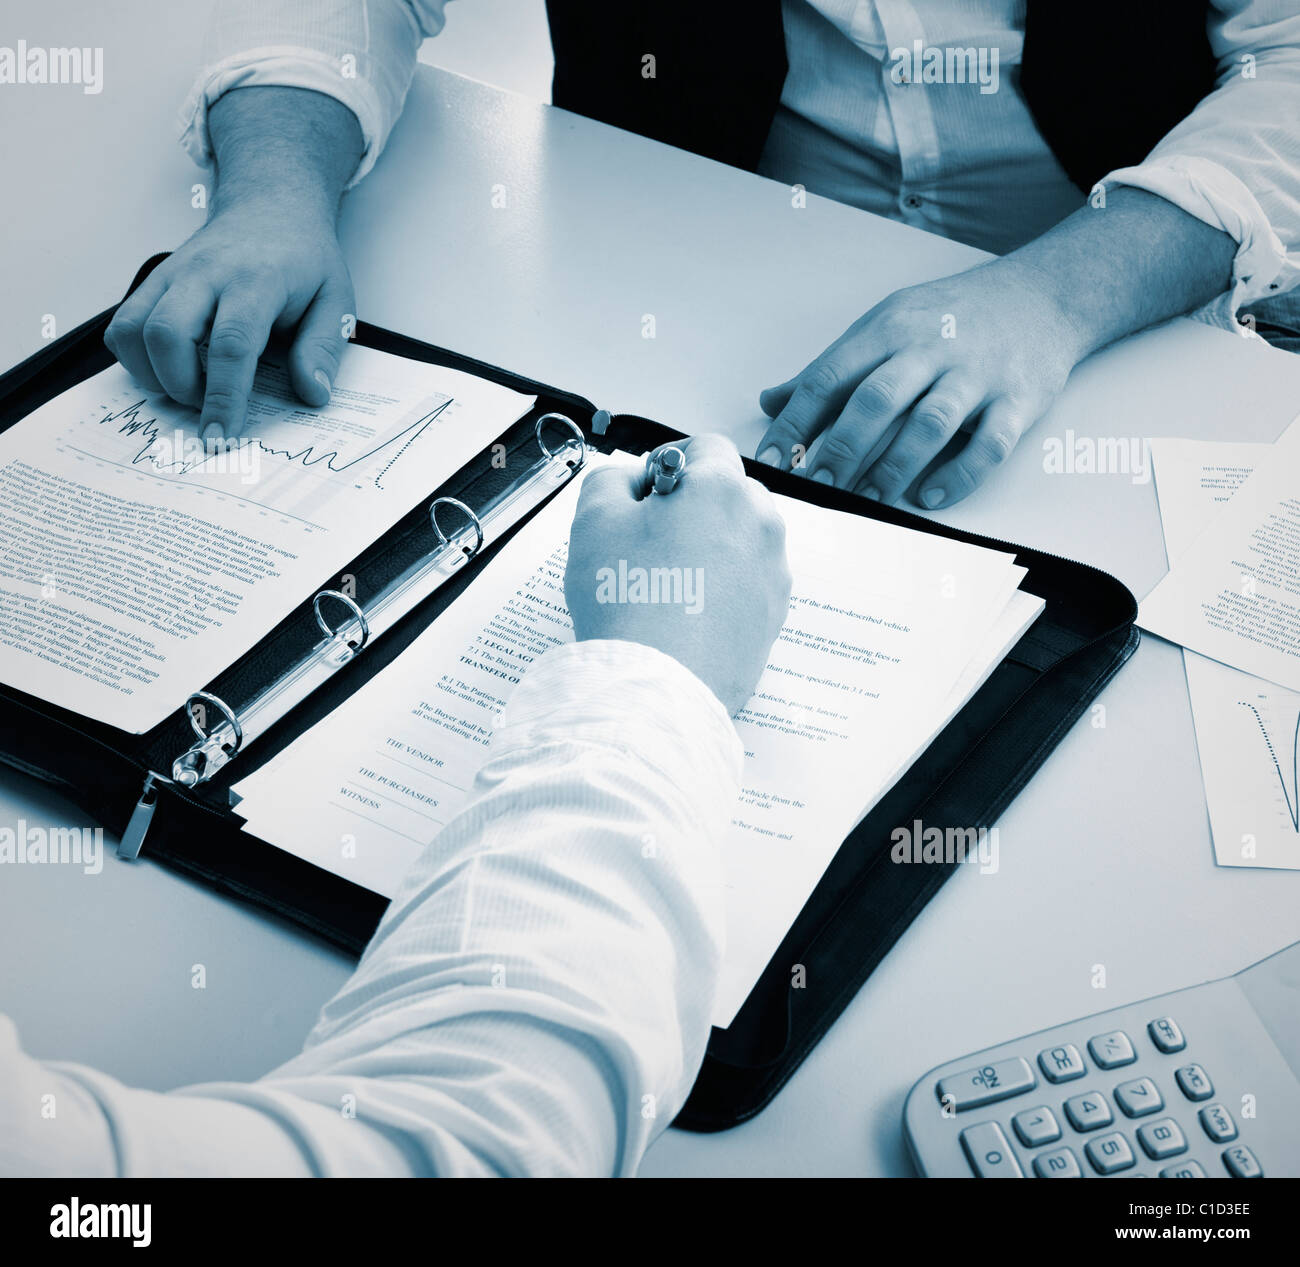 Consulting concept or business meeting Stock Photo